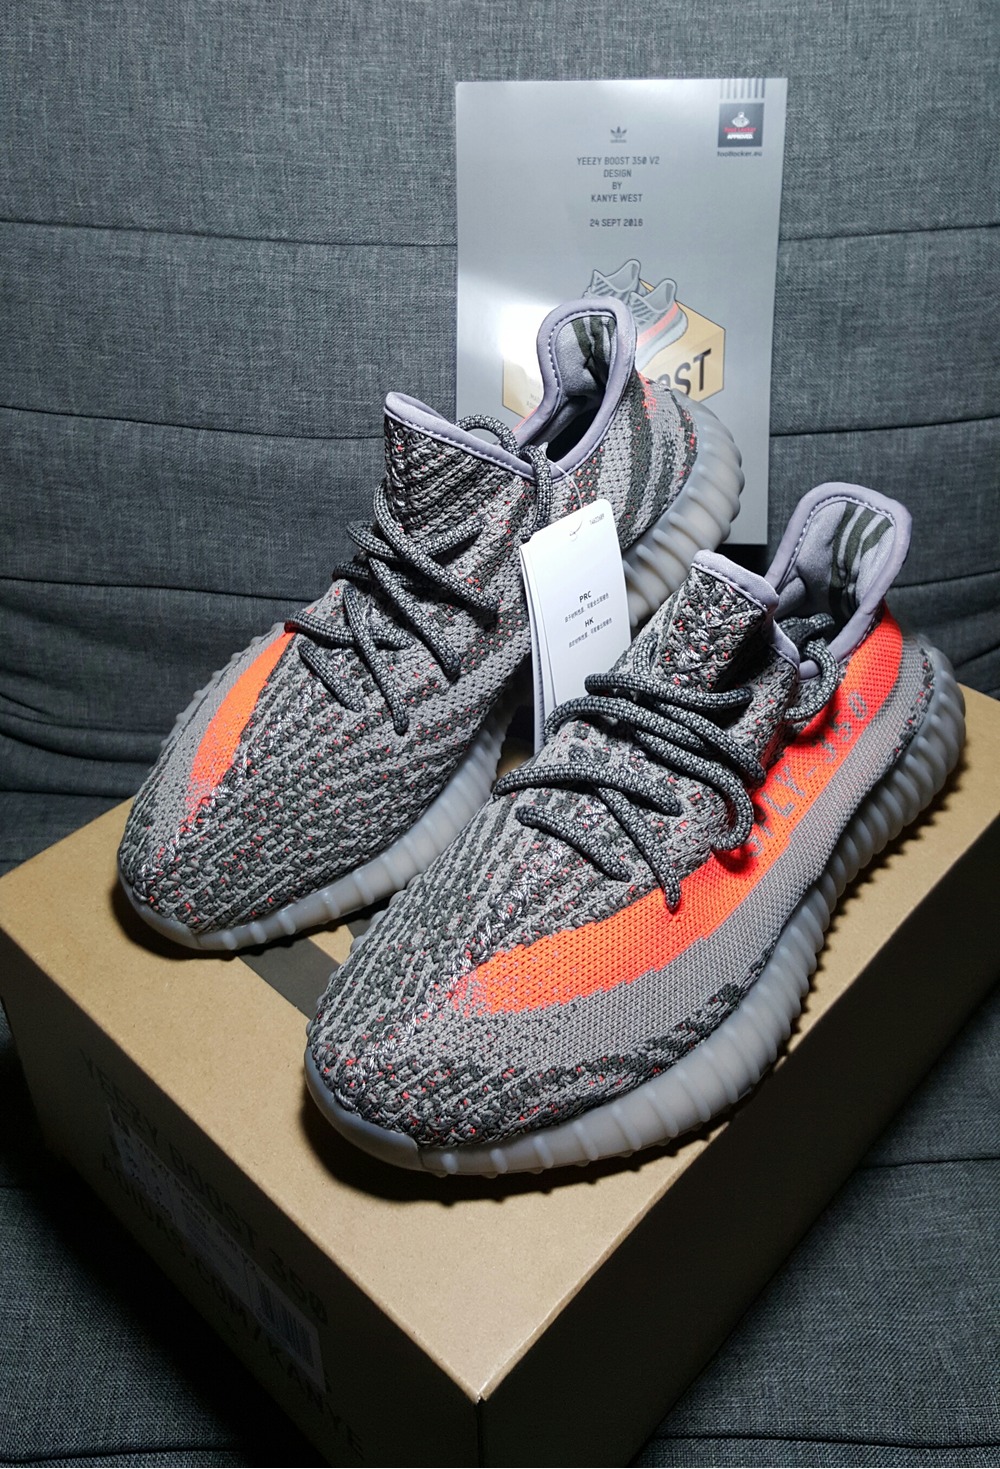 Cheap Gd Adidas Yeezy Boost 350 V2 Citrirf Reflective 5318